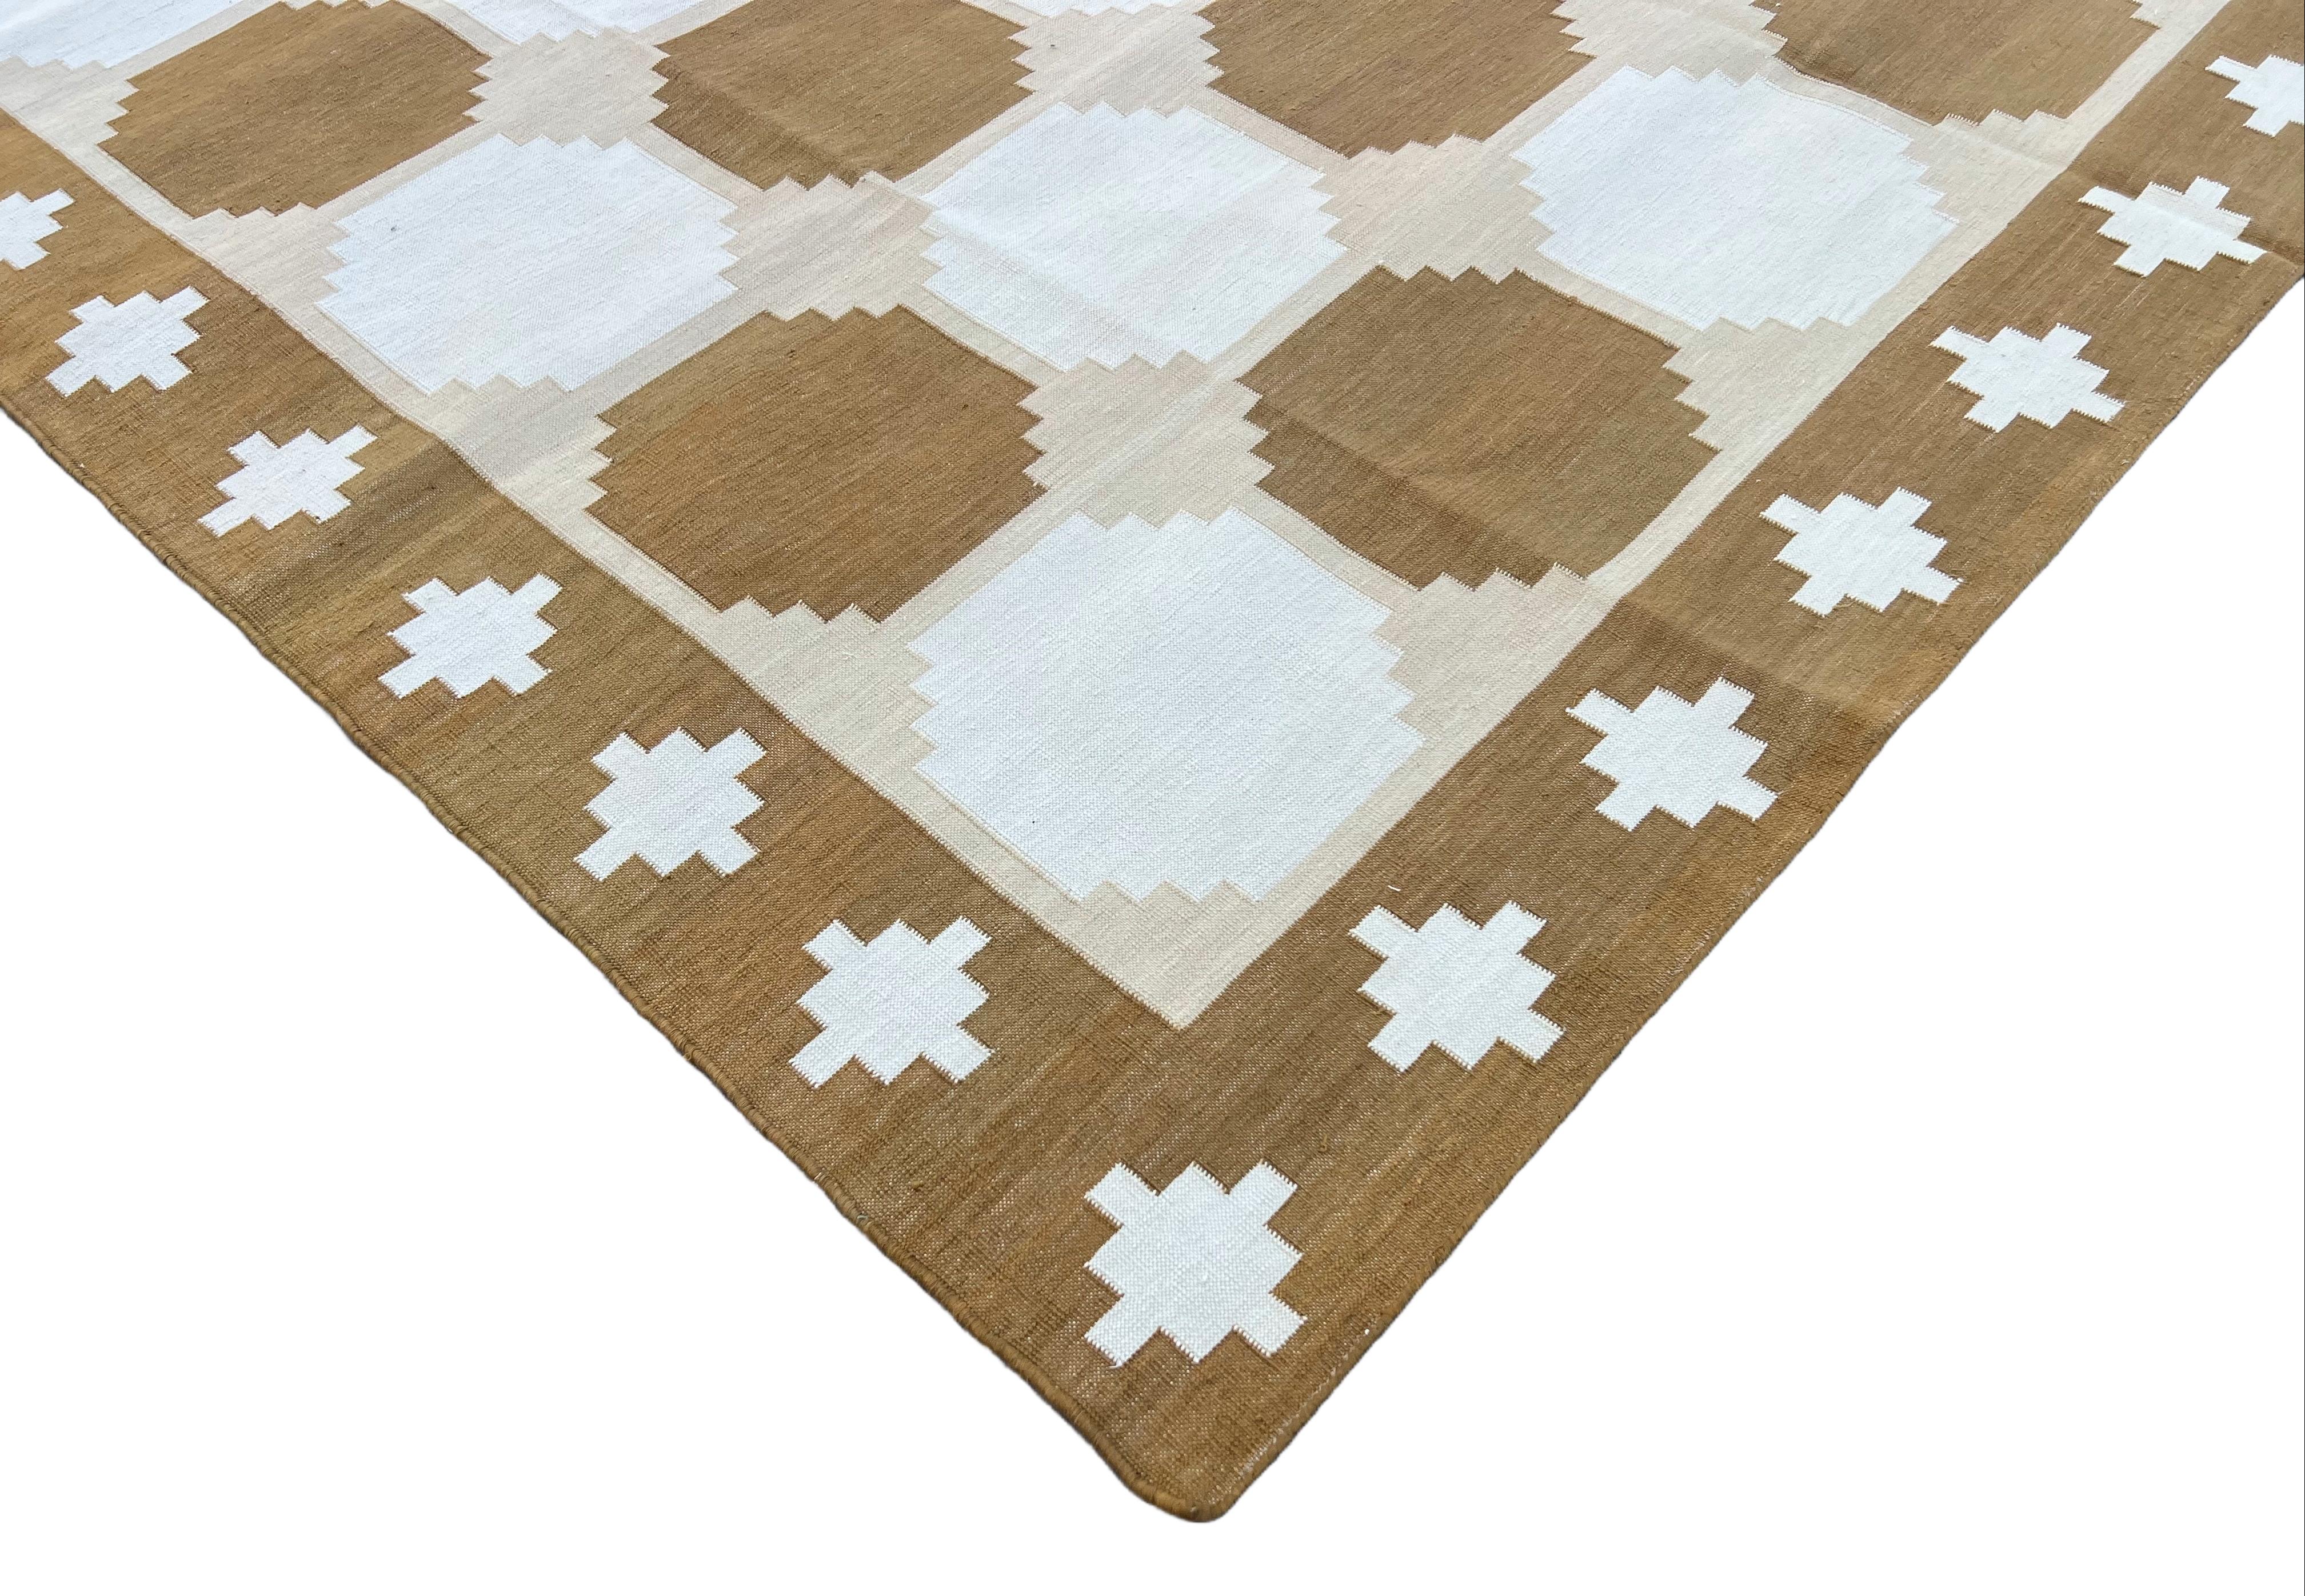 Contemporary Handmade Cotton Area Flat Weave Rug, Beige & Brown Indian Star Geometric Dhurrie For Sale